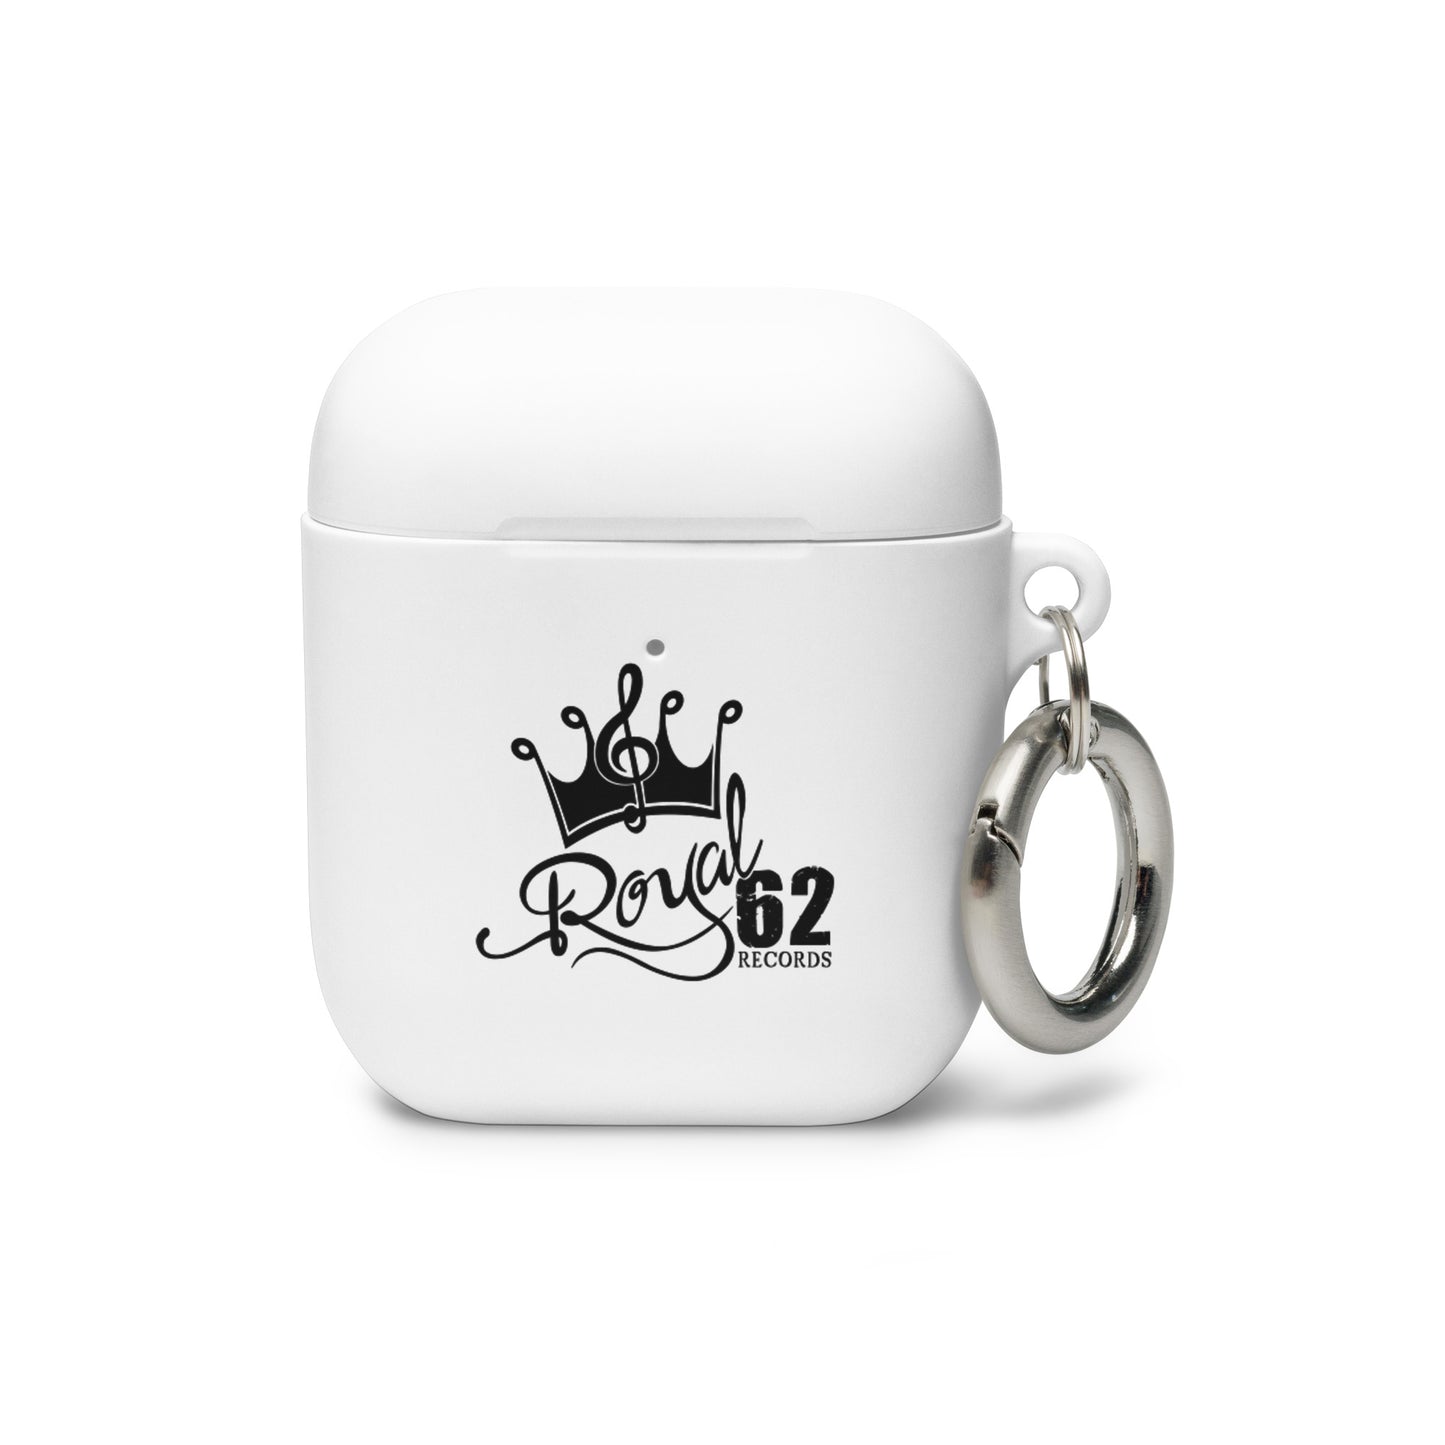 Royal 62 Records AirPods case